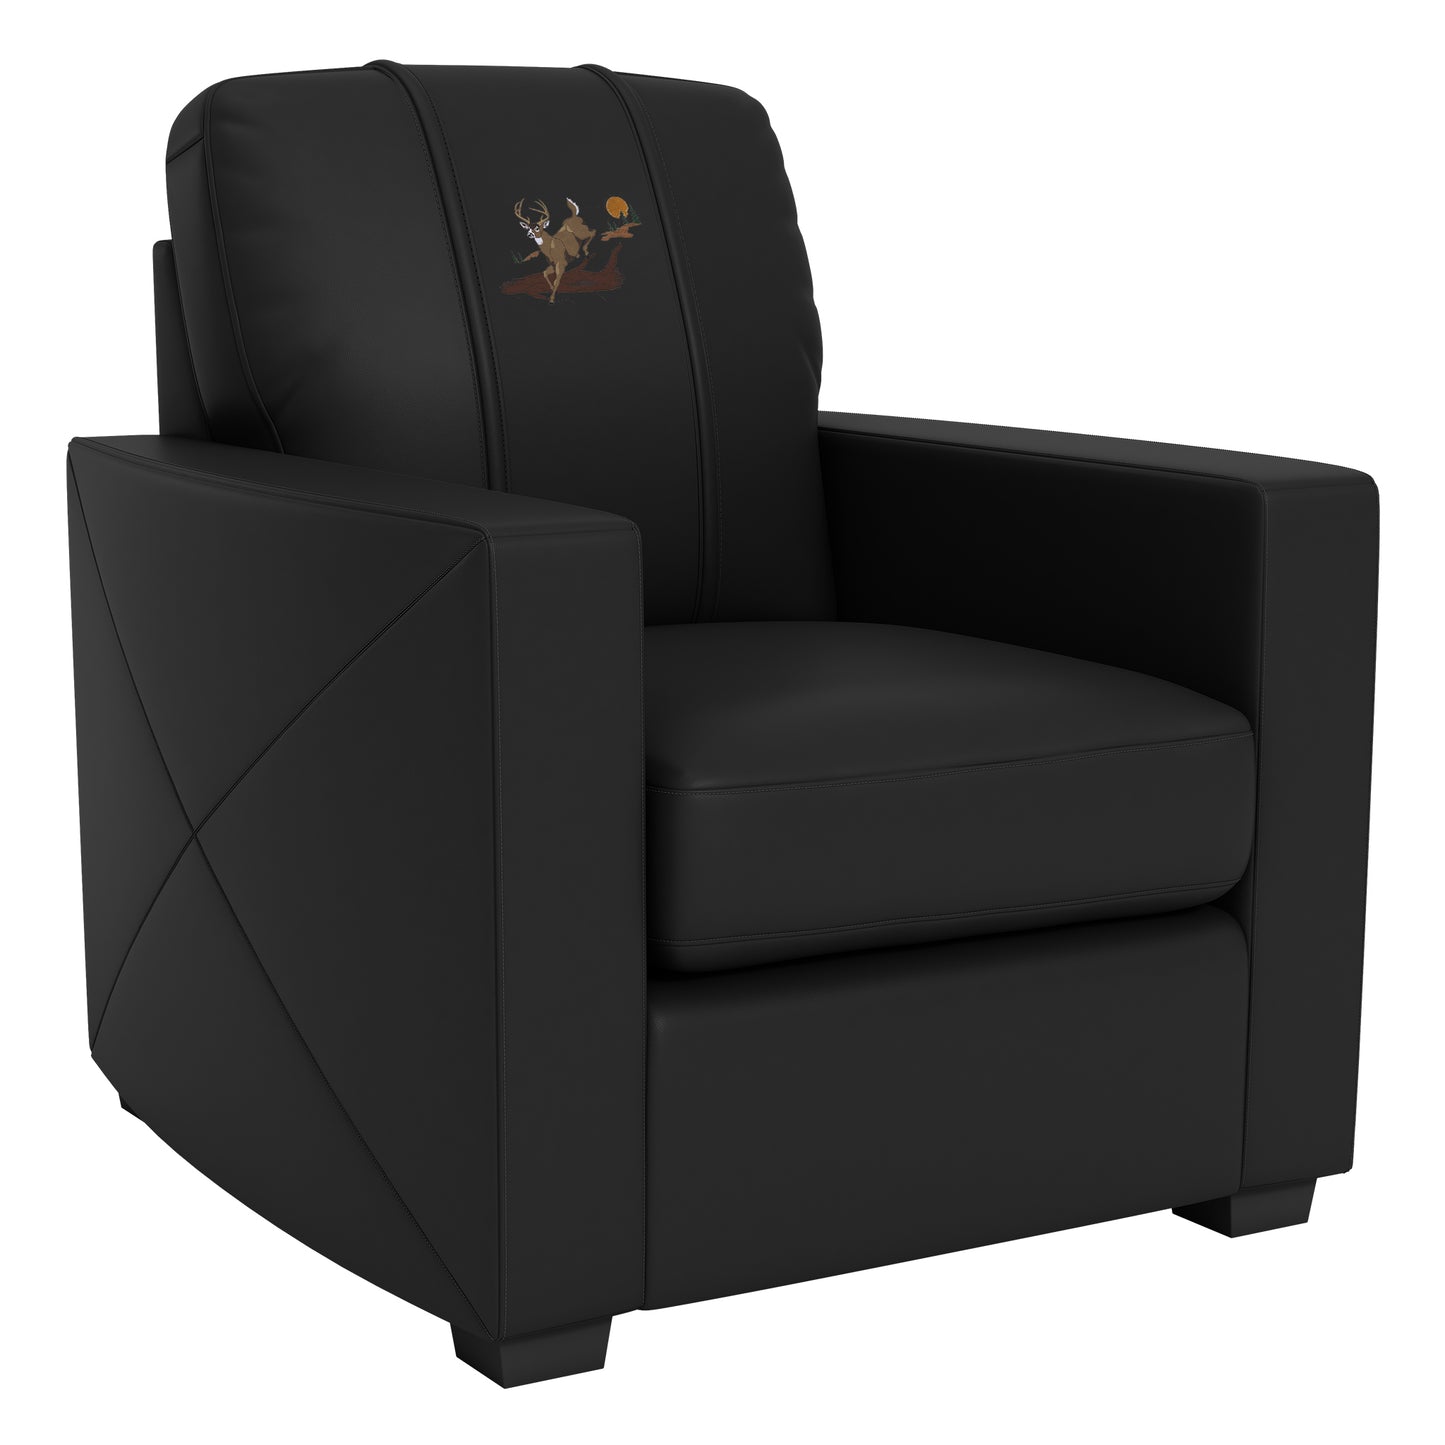 Silver Club Chair with Deer Leaping Logo